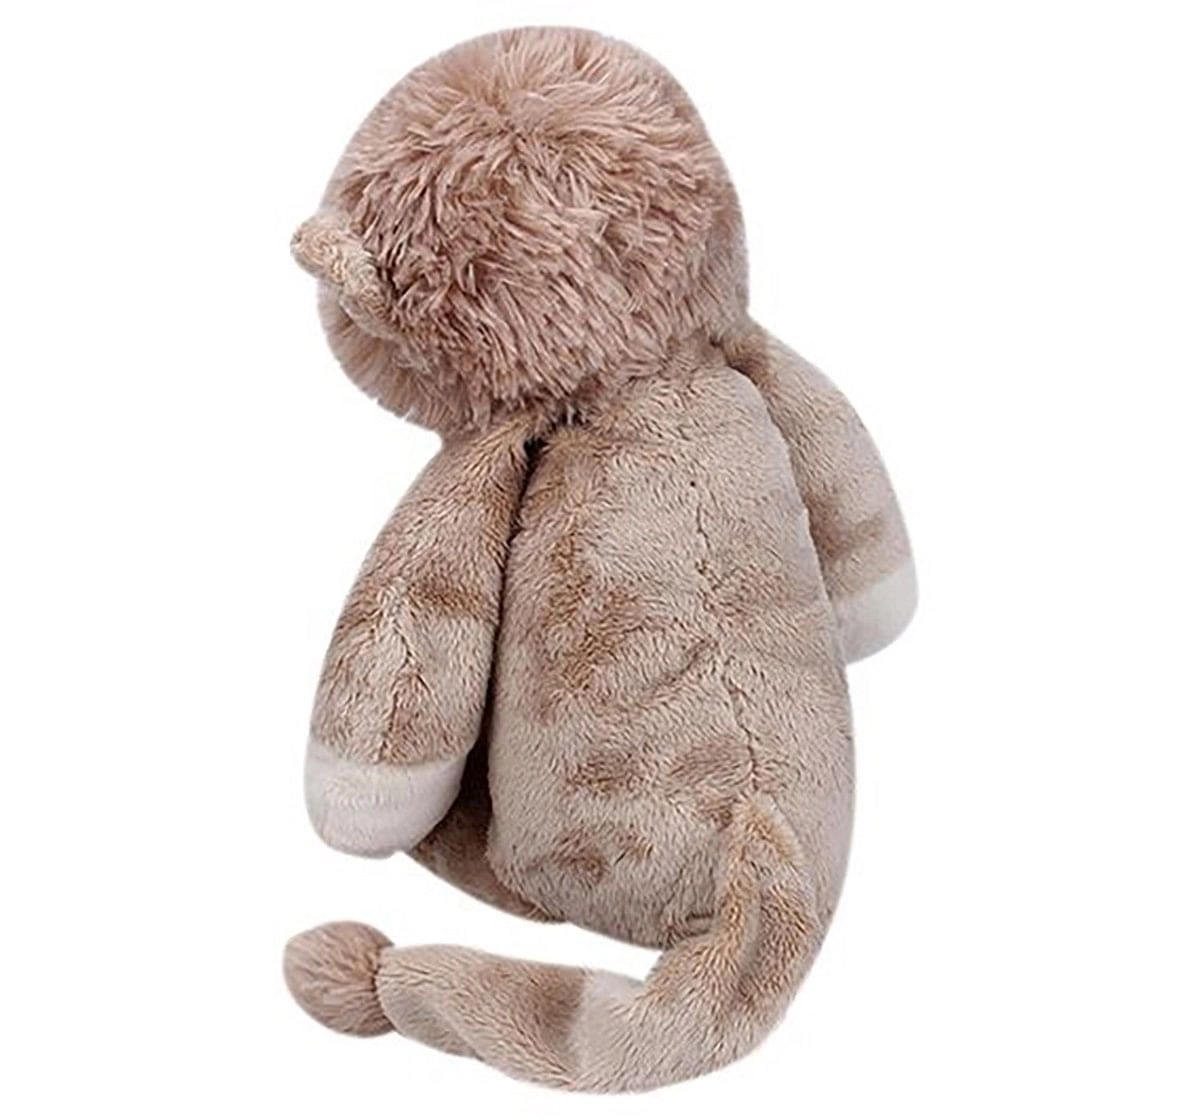 Hamleys Quirky Lion Soft Toy Quirky Soft Toys for Kids age 3Y+ - 16 Cm (Brown)